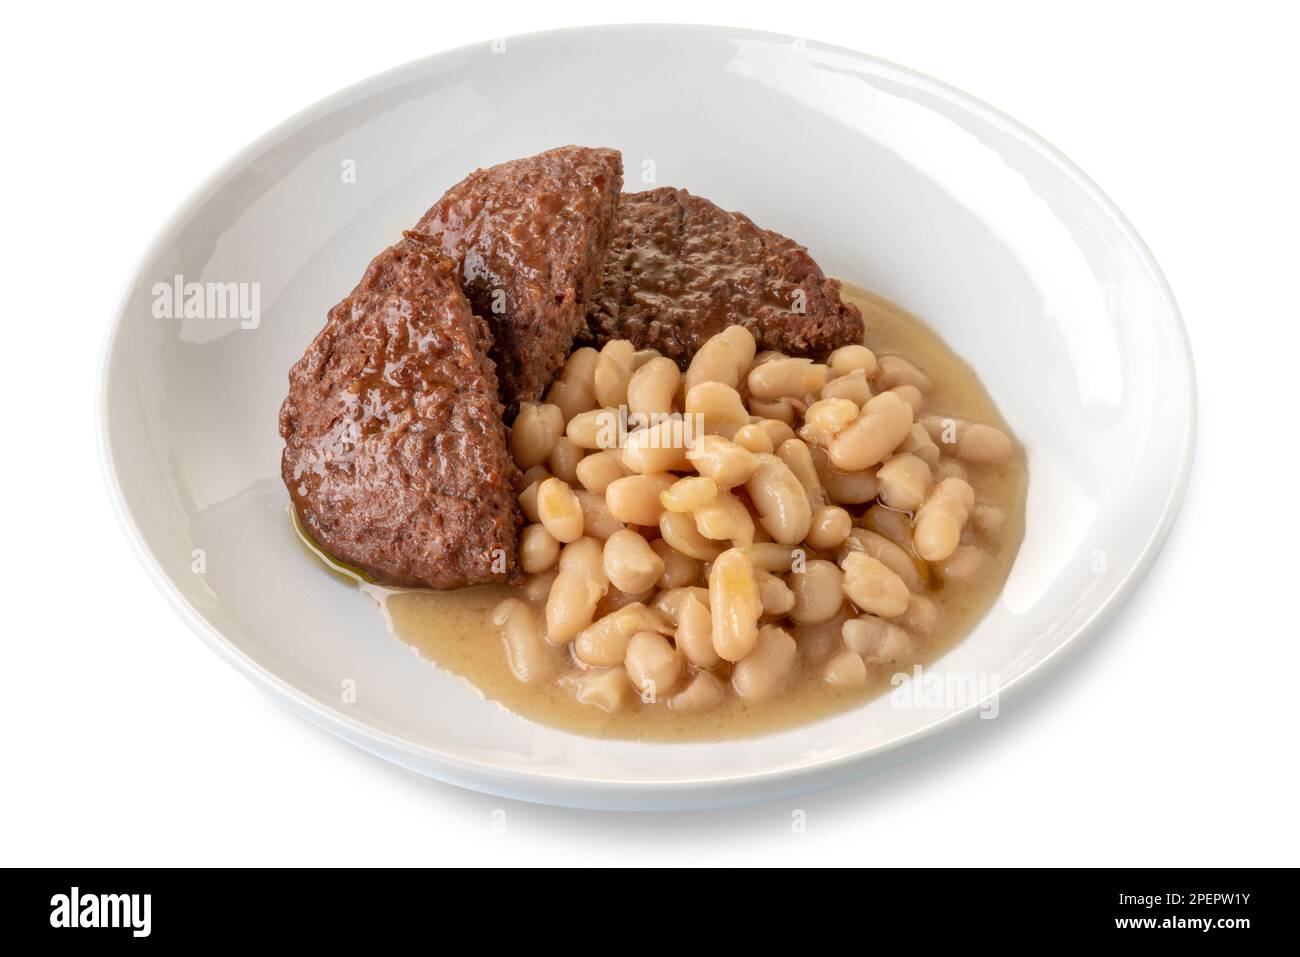 Roast beef burger with cannellini bean soup on a white plate, isolated on white, clipping path included Stock Photo